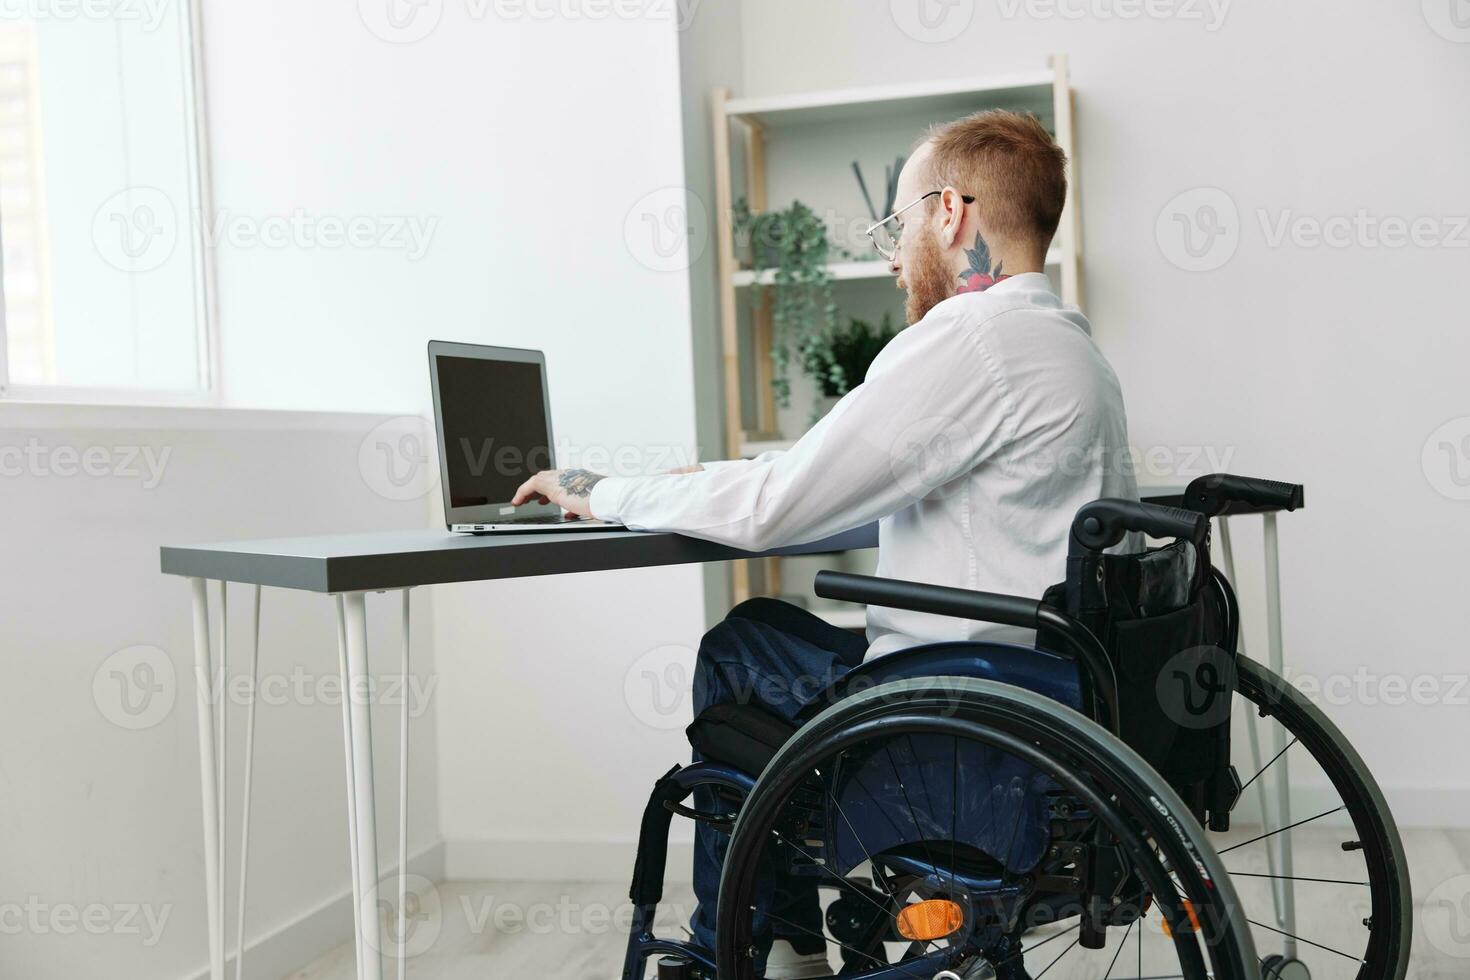 A man wheelchair businessman with tattoos in the office works at a laptop online, business process, a wheelchair close-up, integration into society, the concept of working a person with disabilities photo